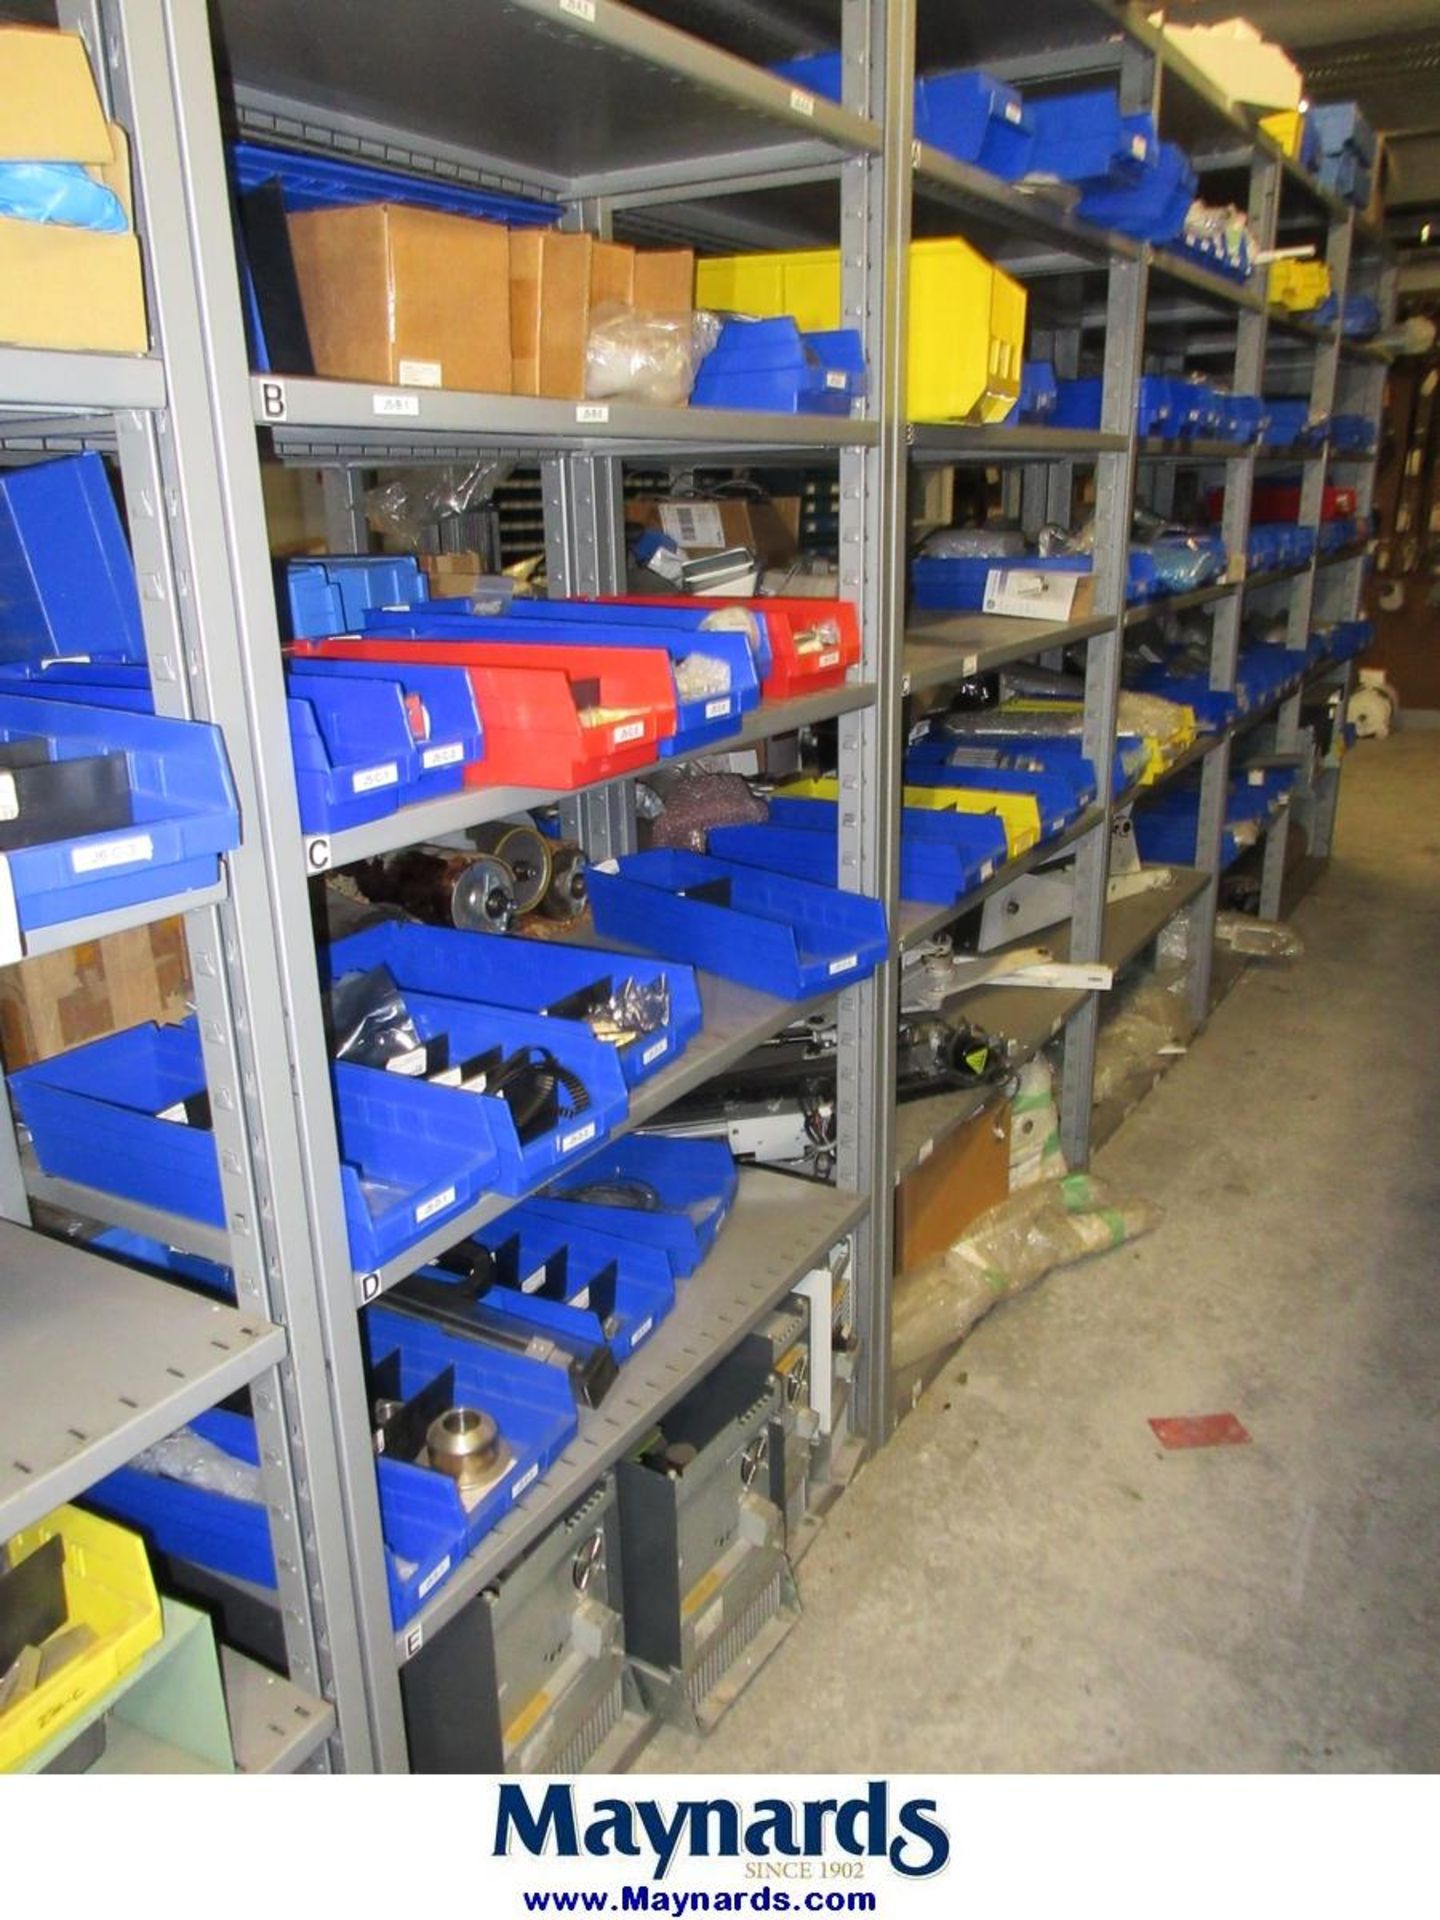 Large Lot of Electrical Controls, PLC's, Drives & Remaining Contents of Maint. Parts Crib - Image 28 of 107